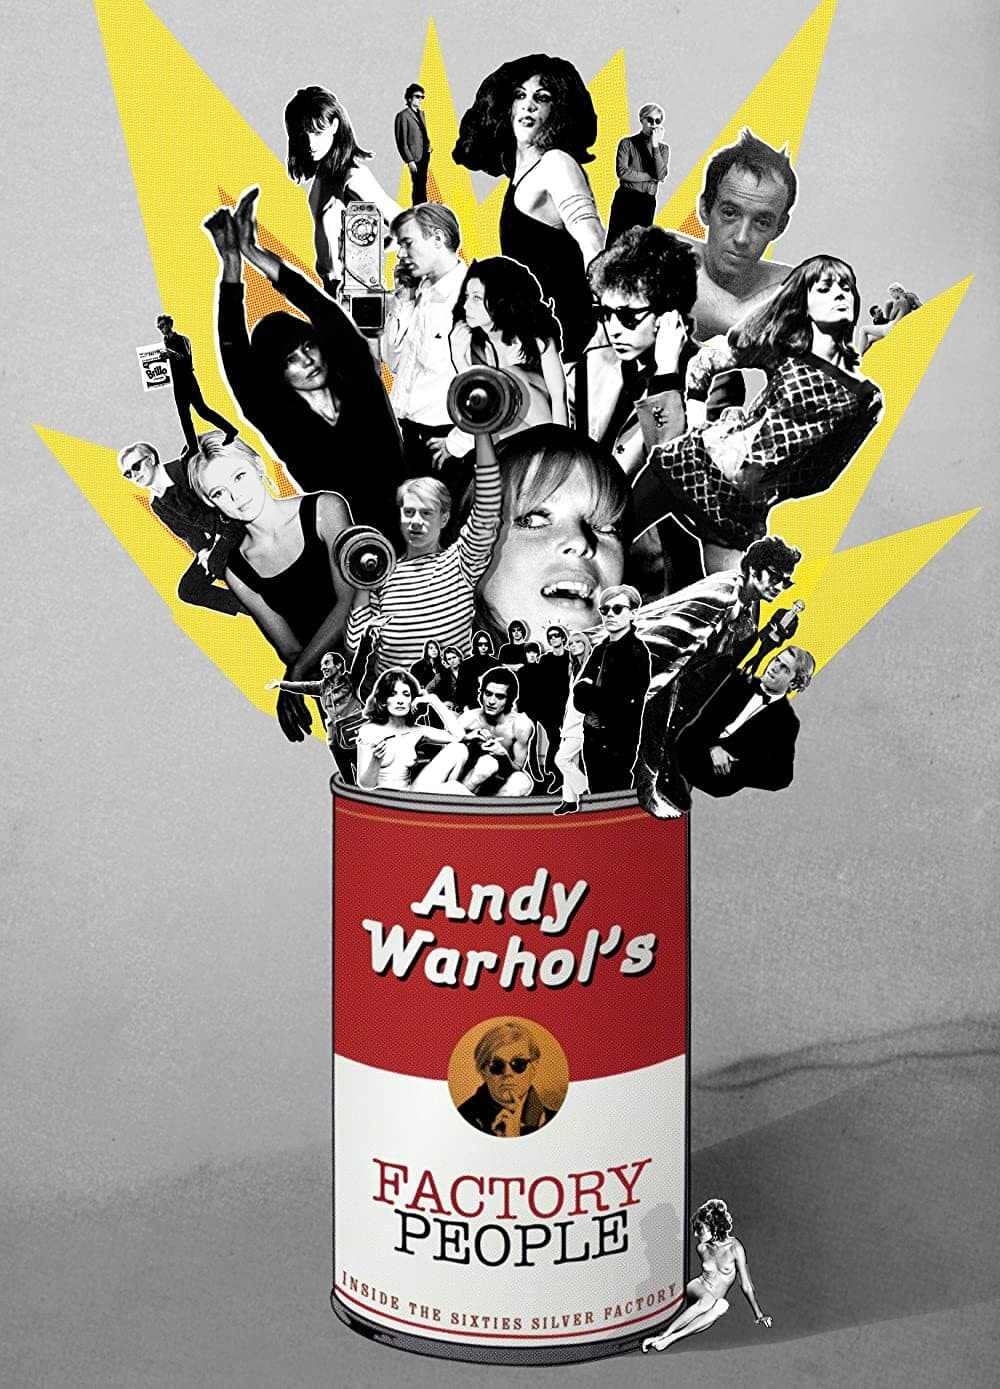 Andy Warhol's Factory People... Inside the Sixties Silver Factory (2008)